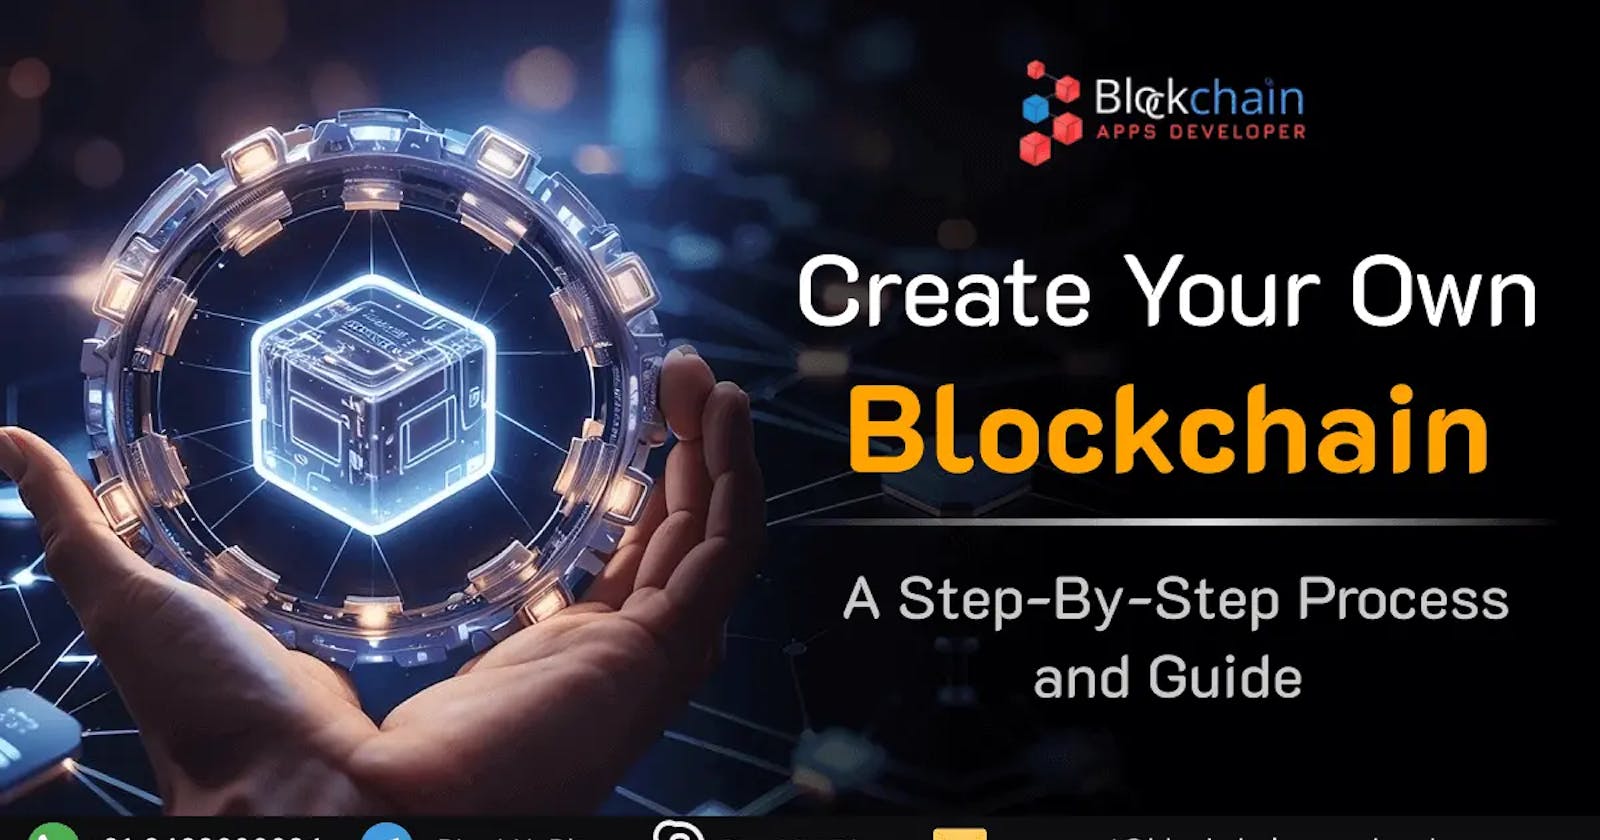 Create Your Own Blockchain From Scratch